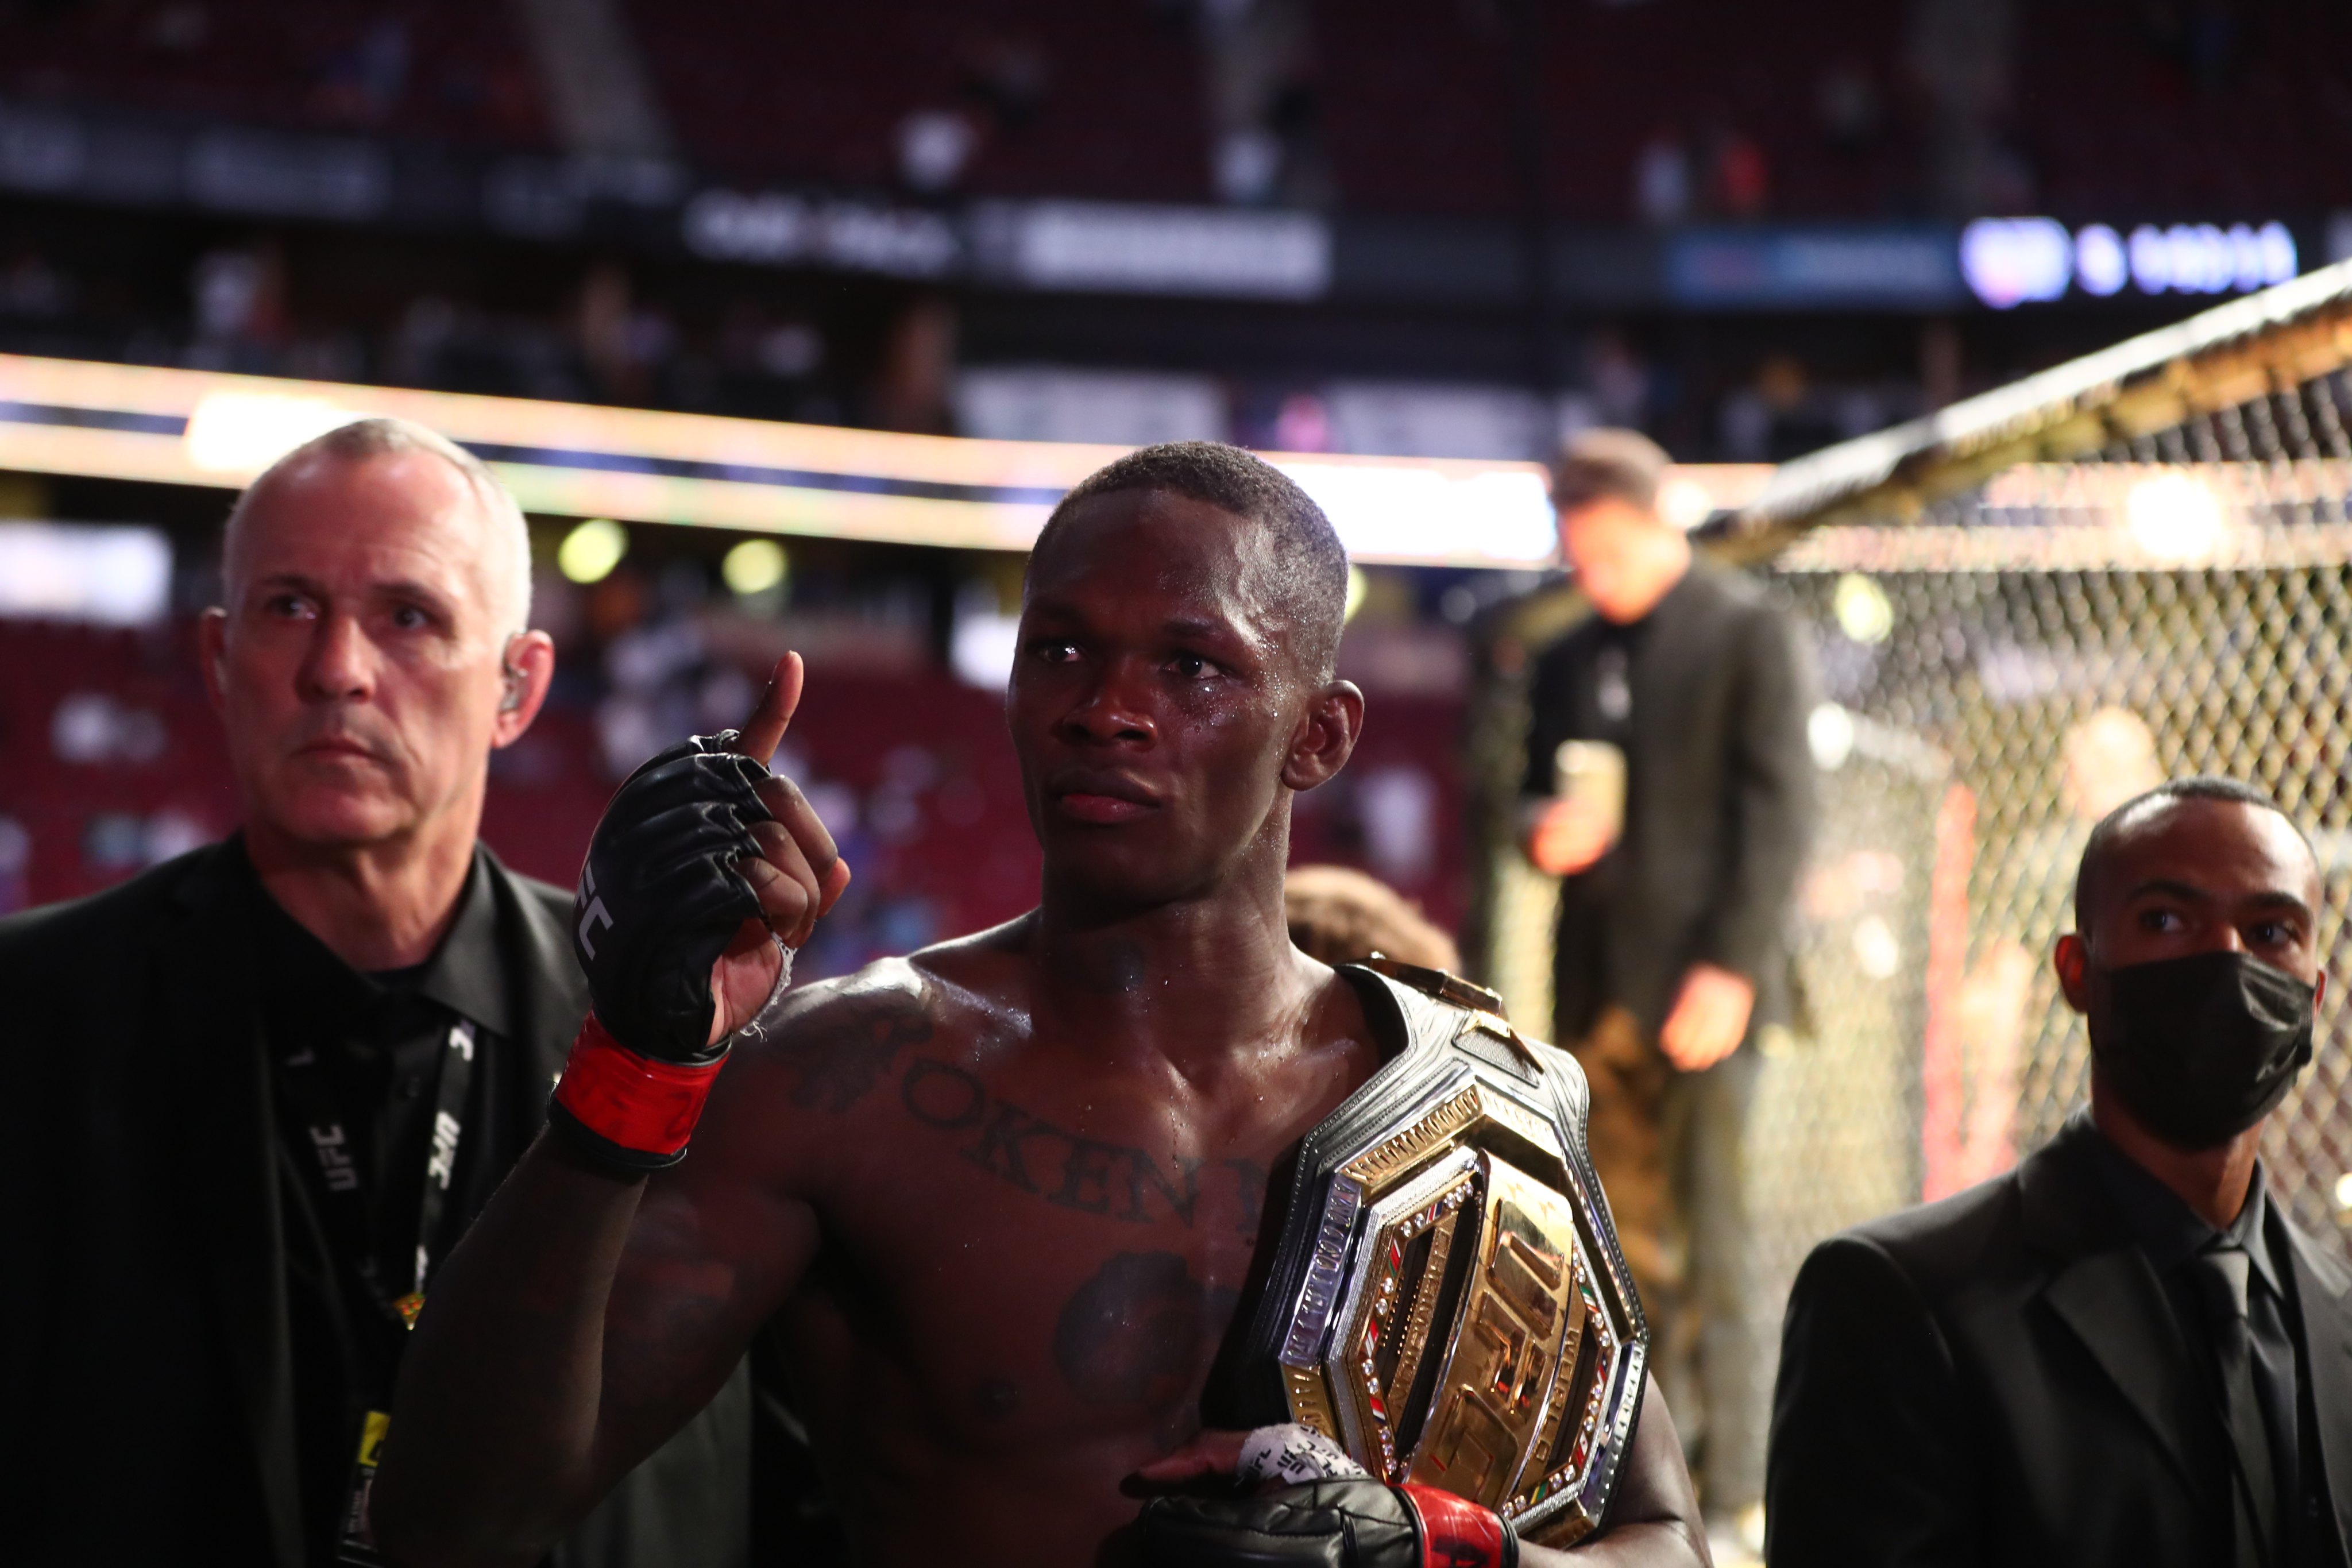 Israel Adesanya reacts following his victory against Marvin Vettori during UFC 263 at Gila River Arena. Photo: USA TODAY Sports